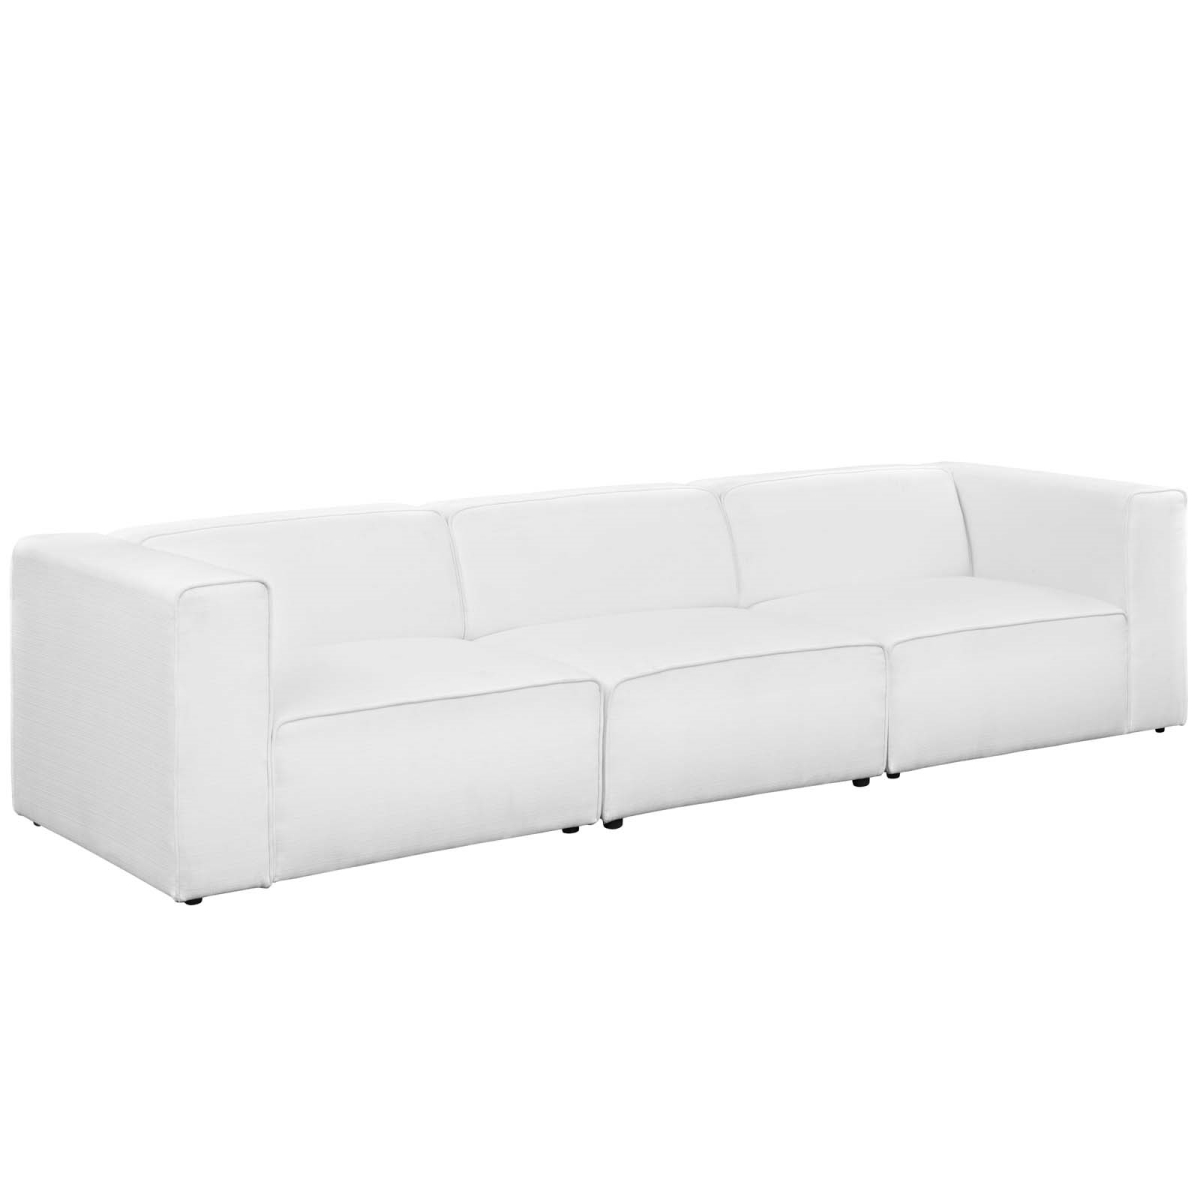 Eei-2827-whi 3 Piece Mingle Upholstered Fabric Sectional Sofa Set - White, 27 X 121.5 X 37 In.